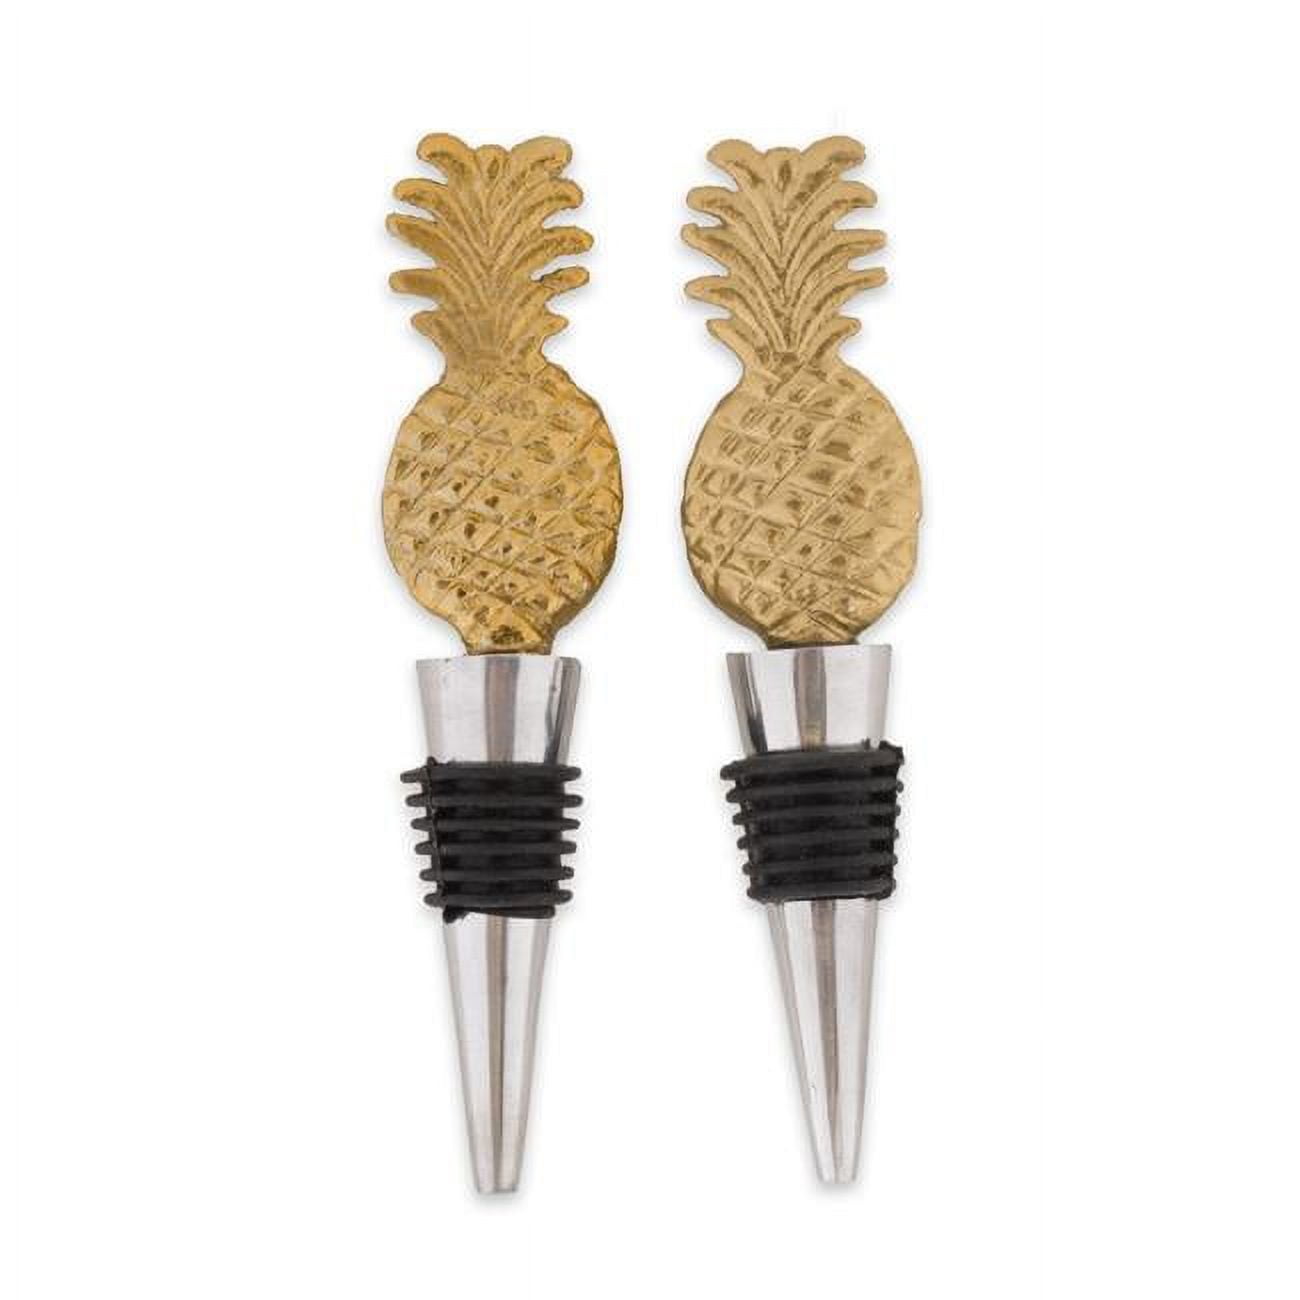 Picture of Design Imports CAMZ10673 Gold Pineapple Bottle Stopper - Set of 2